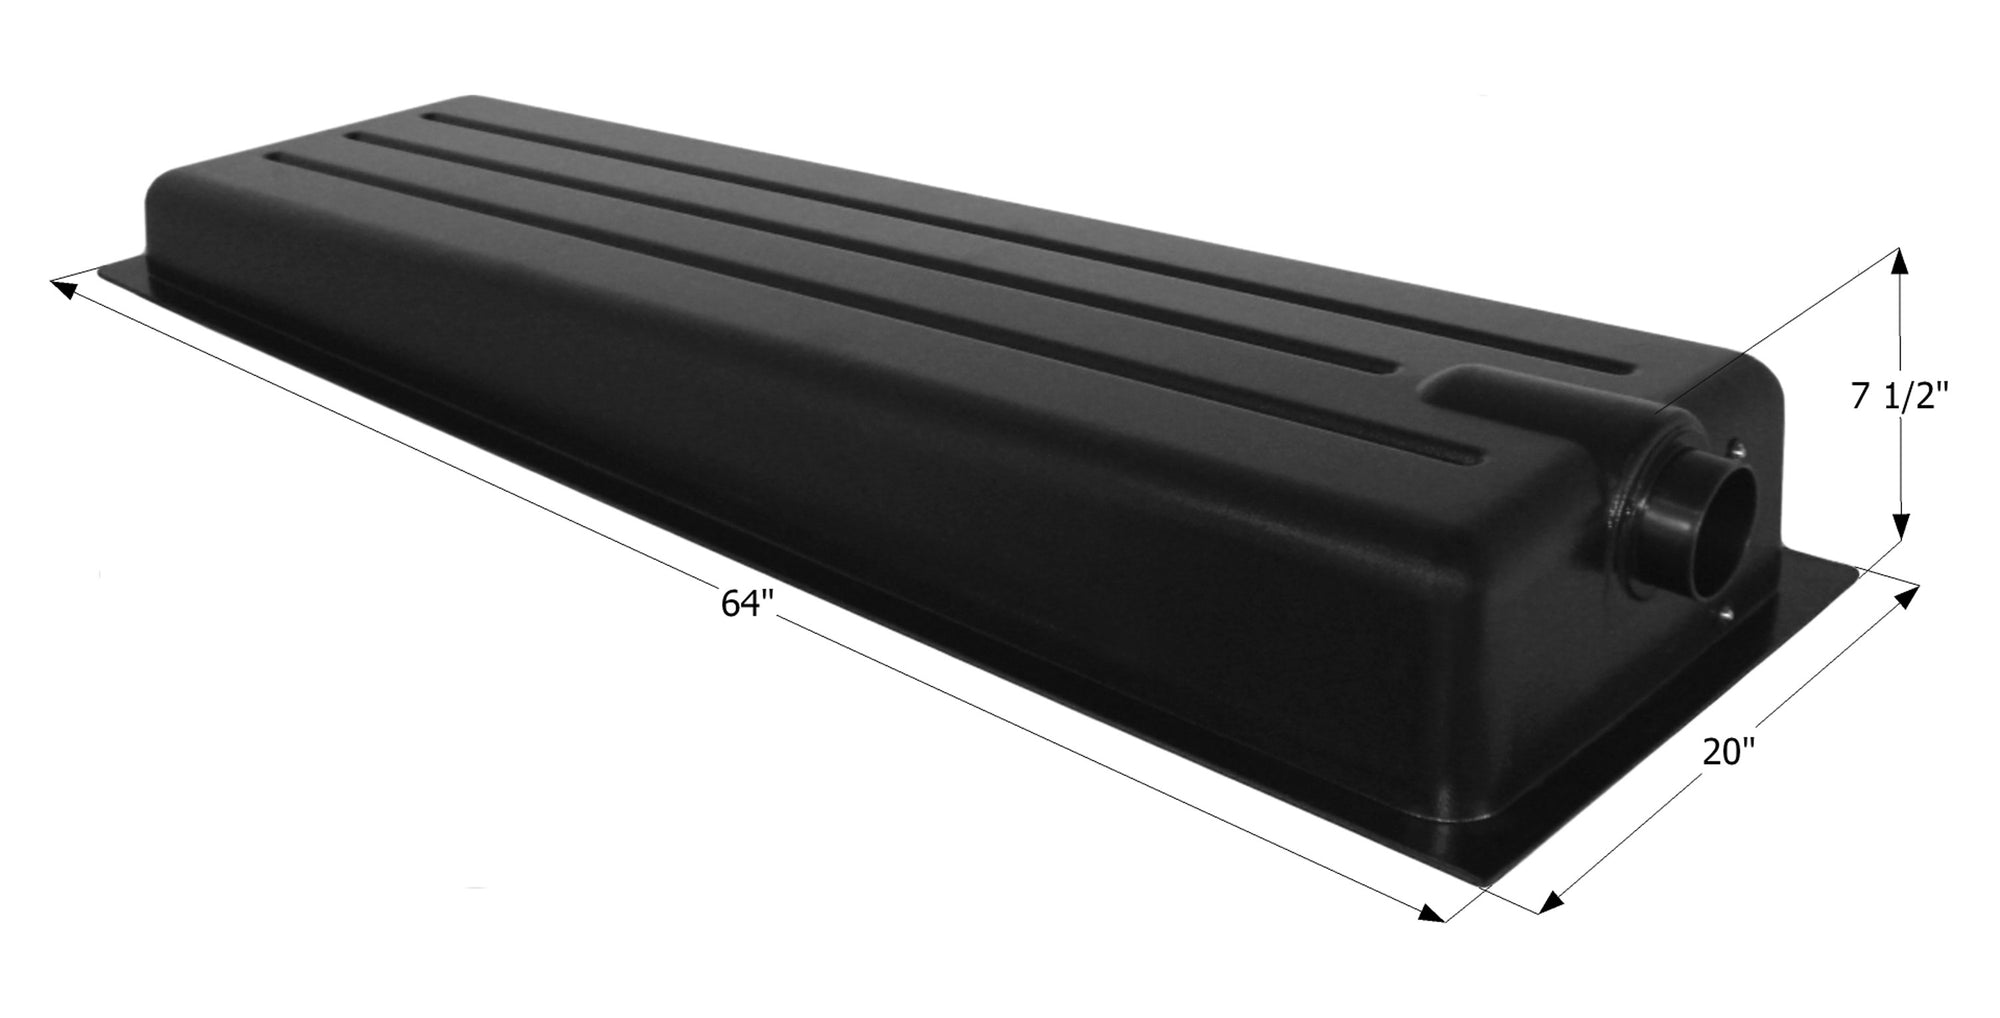 Icon 12368 Holding Tank with Center End Drain HT186BED - 64" x 20" x 7.5", 20 Gallon